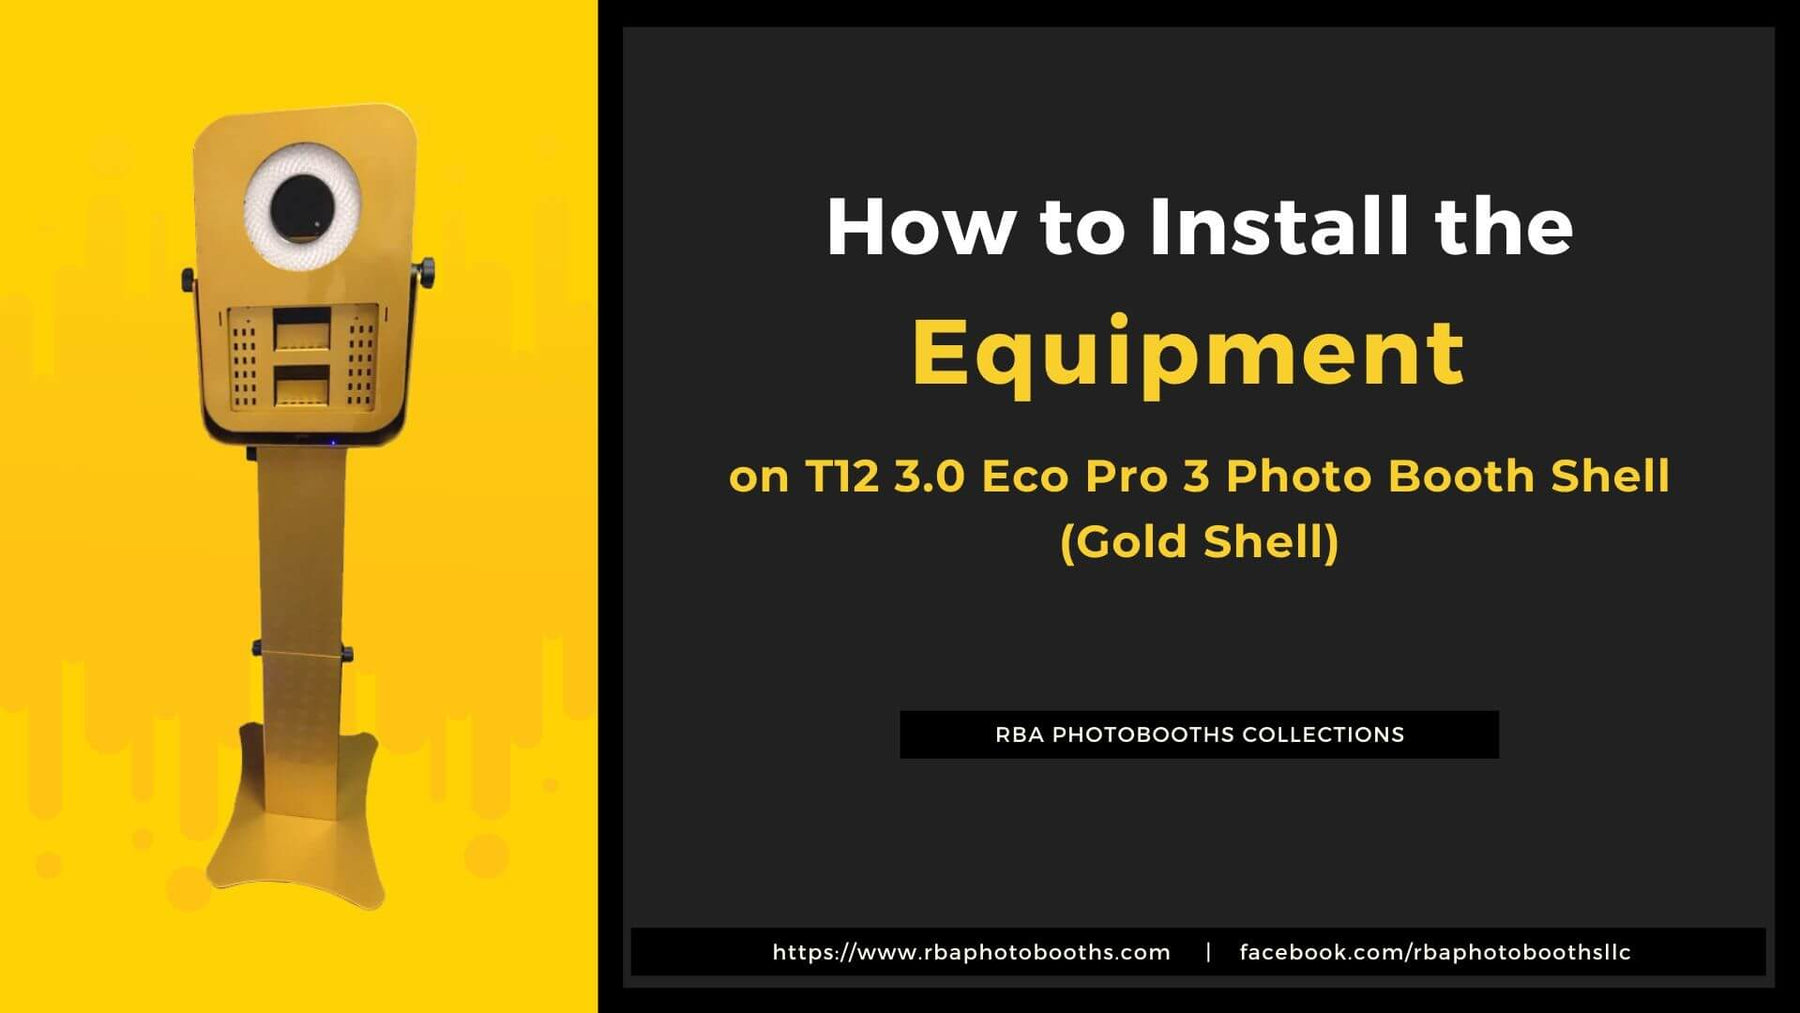 How to Install The Equipment On The T12 3.0 Eco Pro 3 Photo Booth Shell (Gold Shell)